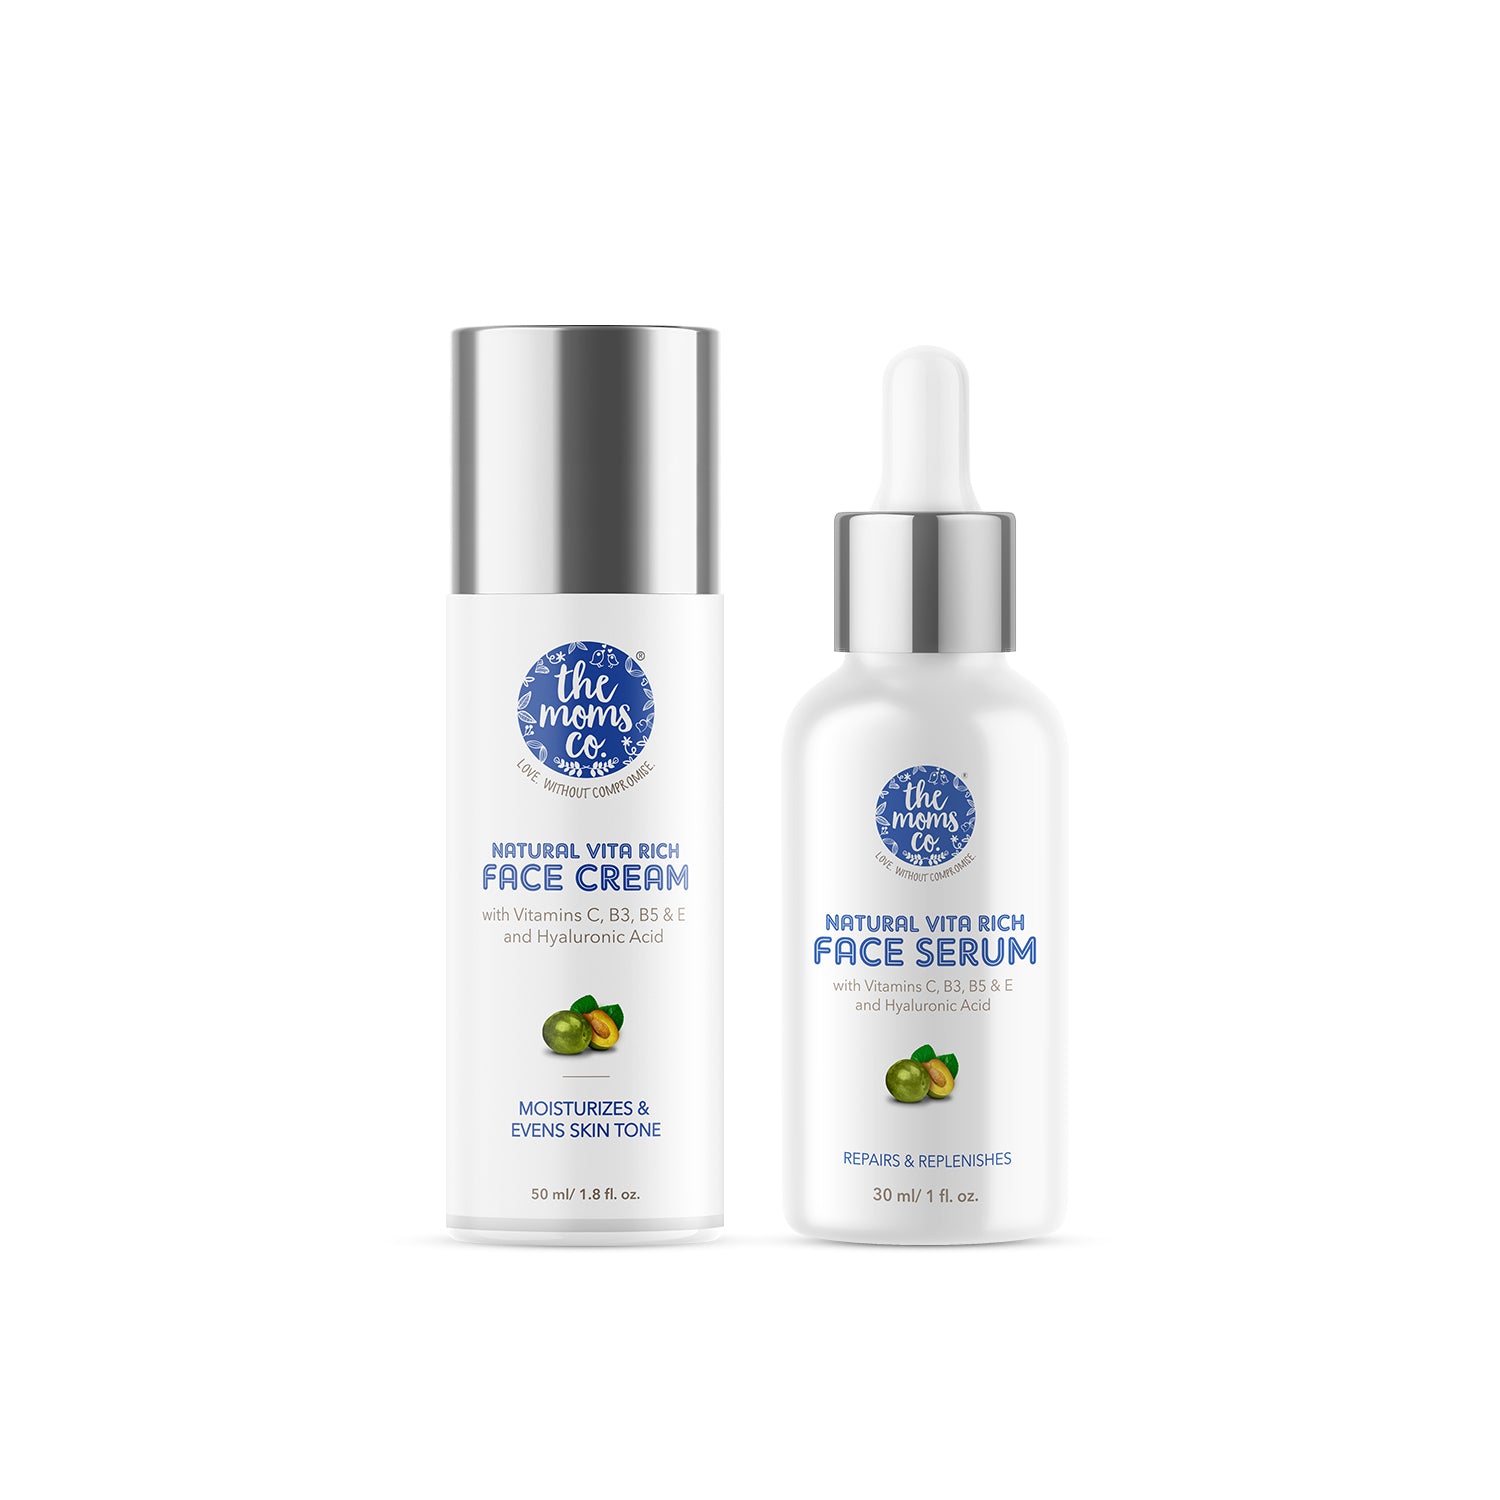 The Moms Co. Natural Vita Rich Daily Face Cream (50 ml) & Face Serum (30 ml) l Reduce Pigmentation, Dark Spots & Blemishes l Glowing with Vitamins C, B3, B5 & E and Hyaluronic Acid